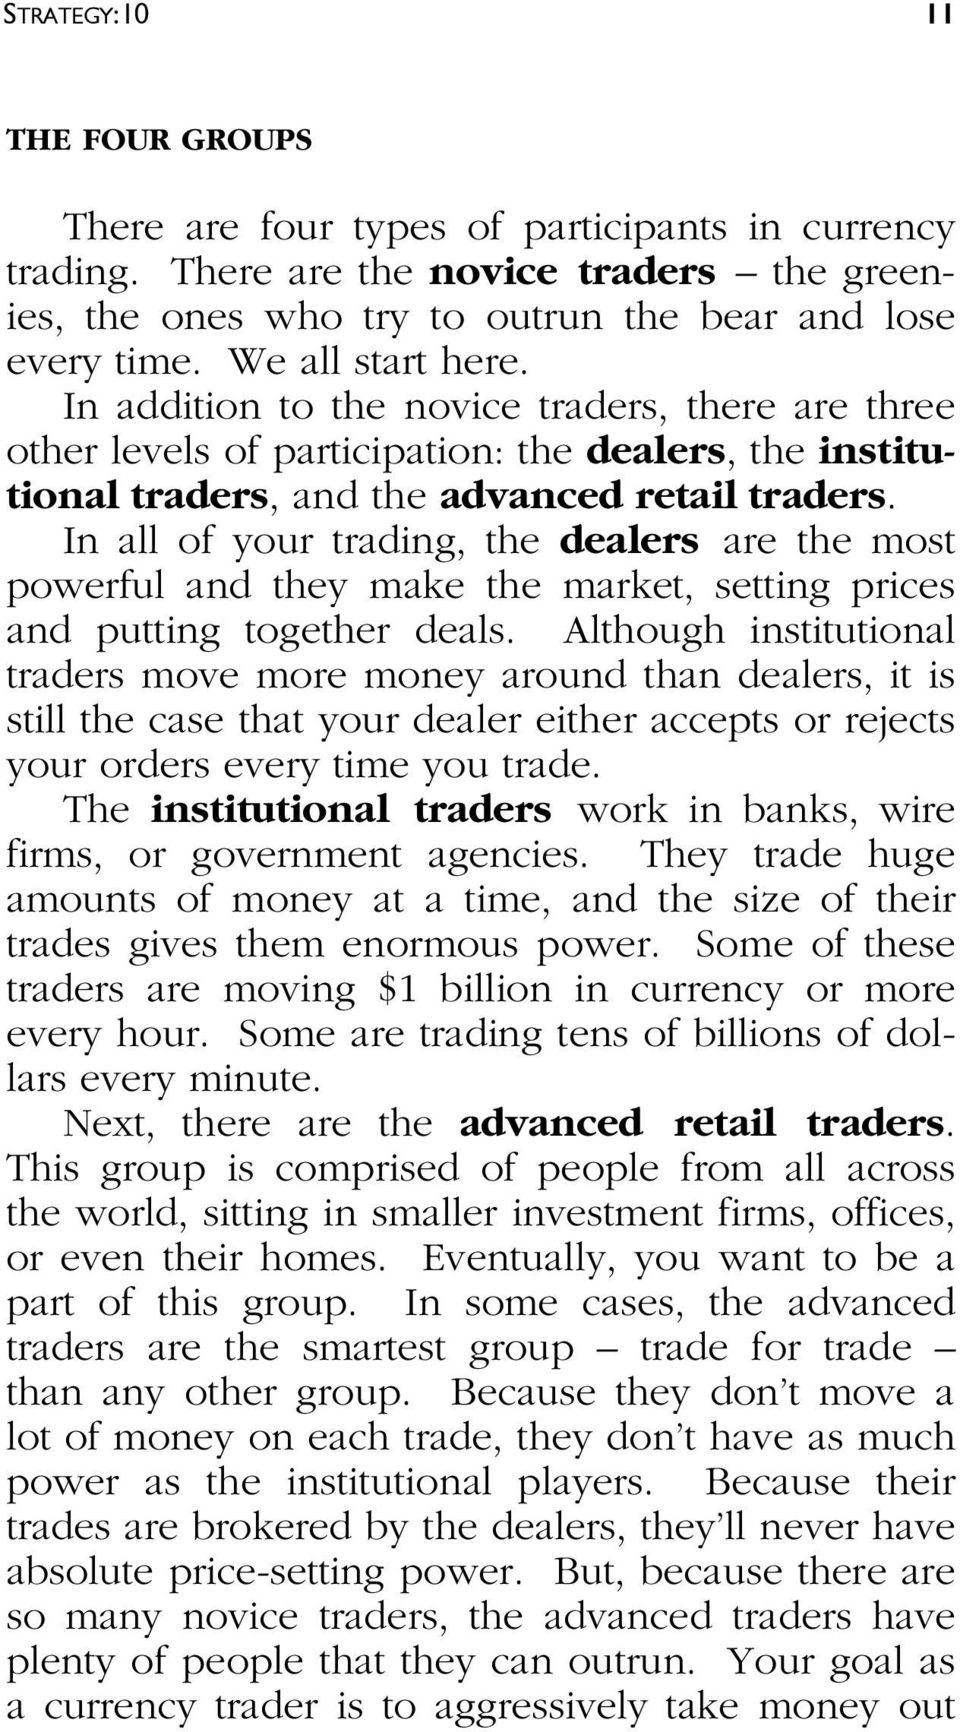 In all of your trading, the dealers are the most powerful and they make the market, setting prices and putting together deals.